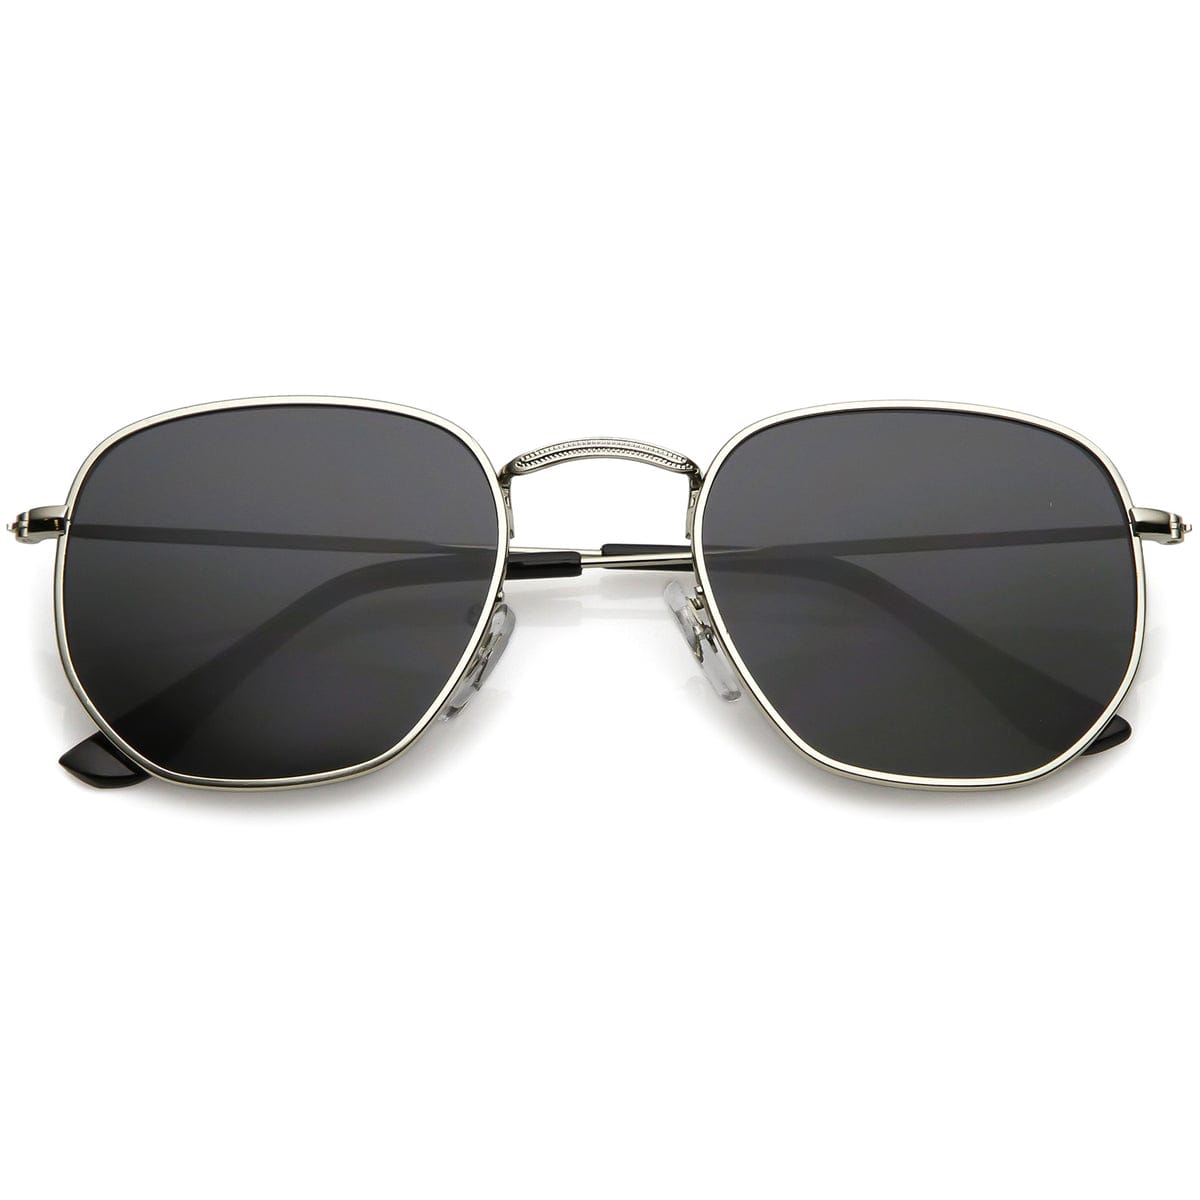 METAL FRAME 01 SUNGLASSES IN METAL WITH MINERAL GLASS LENSES - GOLD / GREEN  | CELINE